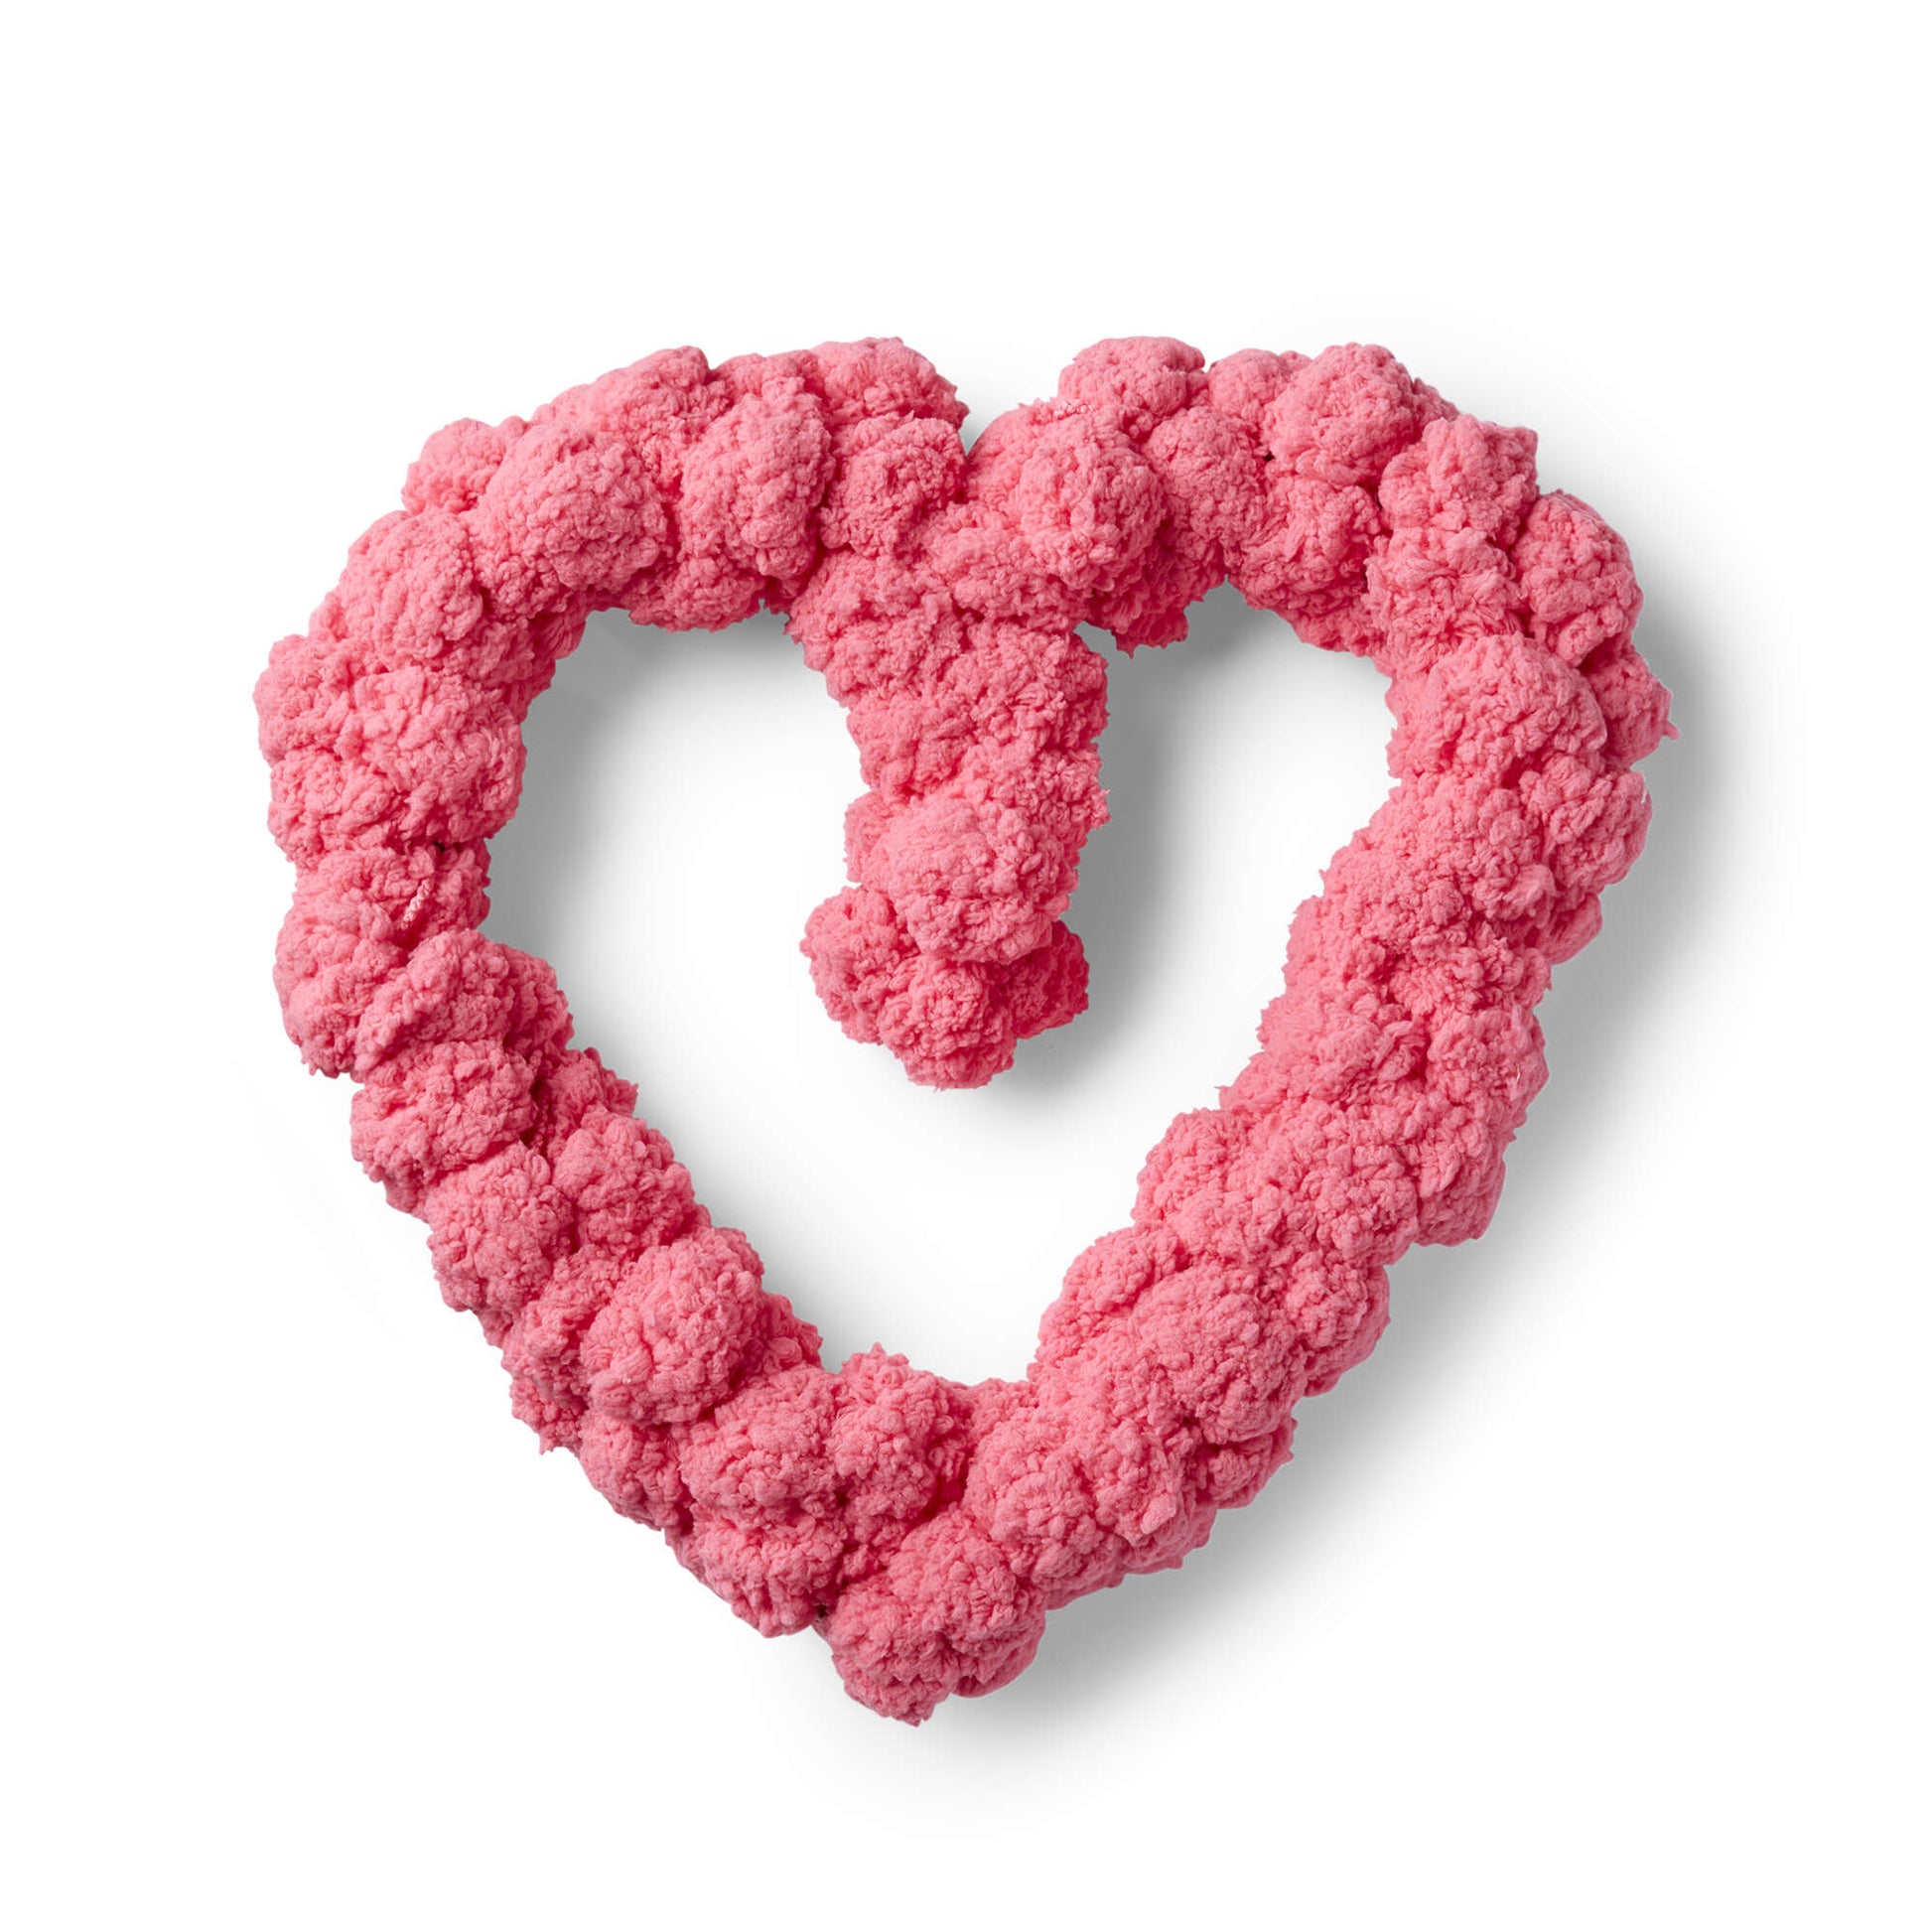 Free Red Heart Craft Pom-dorable Heart Wreath Pattern